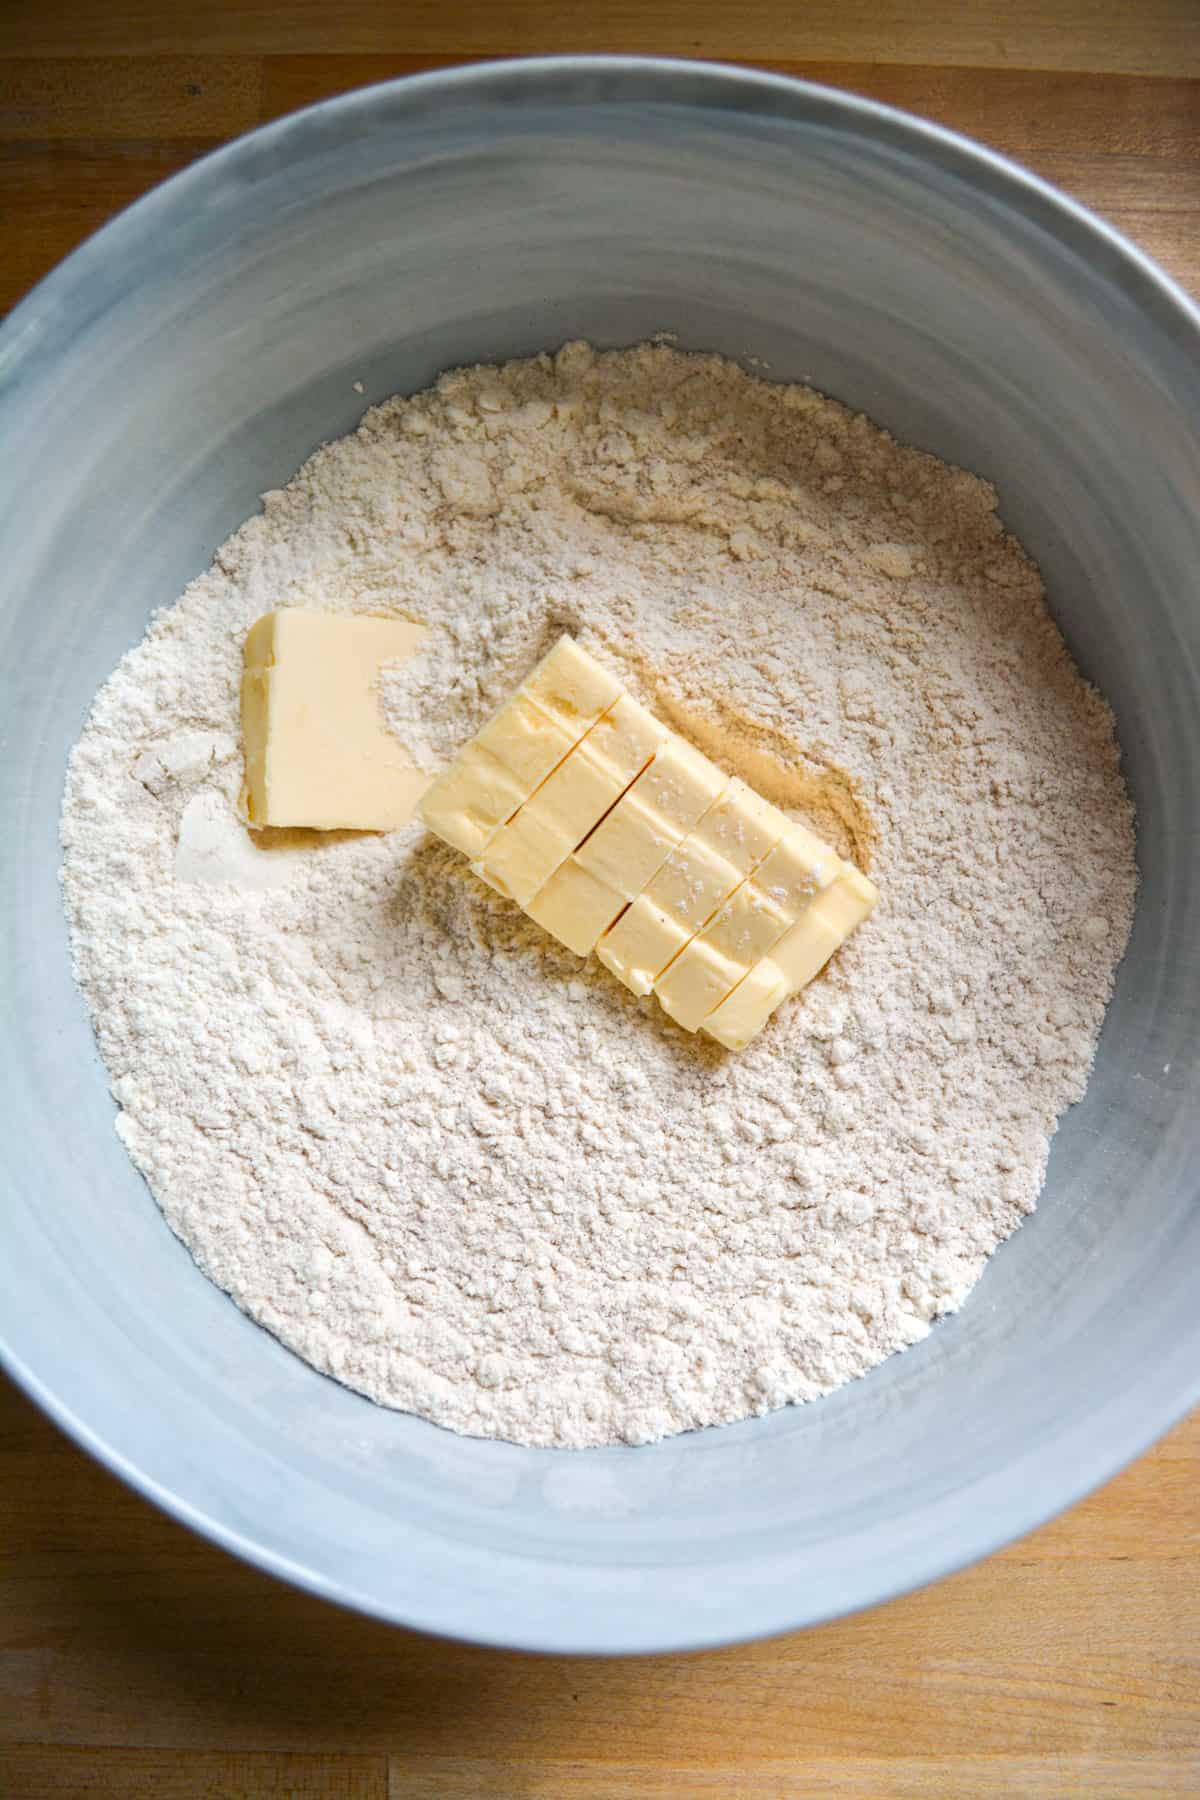 Cubed vegan butter added into the dry ingredients in the mixing bowl.